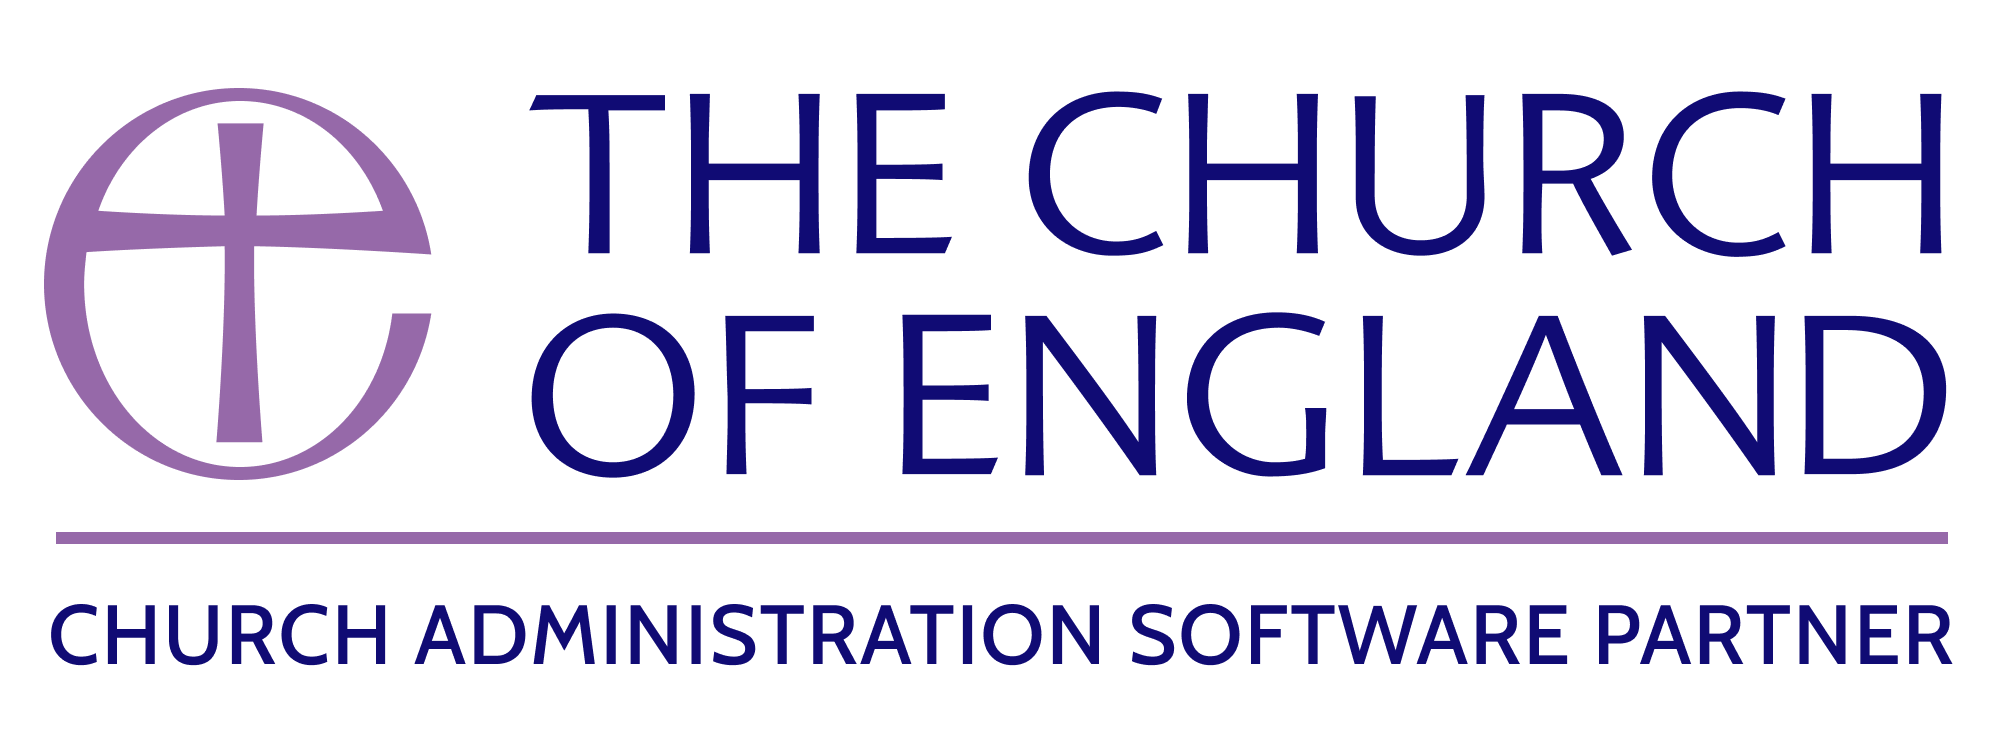 The Church of England Administration Software Partner